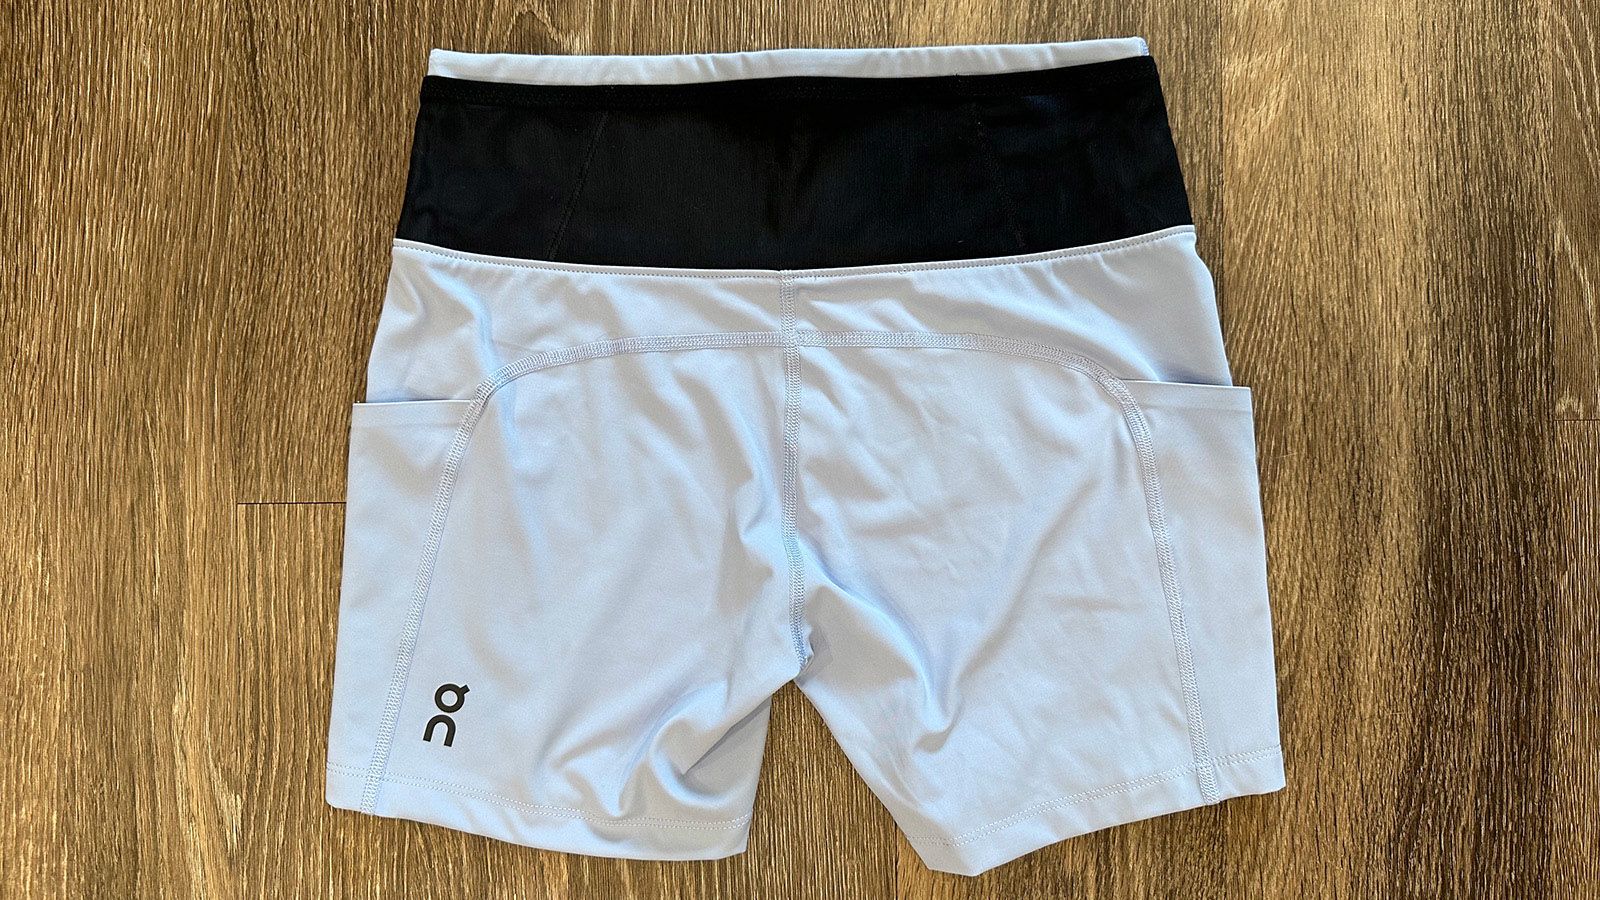 Super Comfortable And Ethical Women's Running Shorts, Clothing and Runners  Gear For 2022